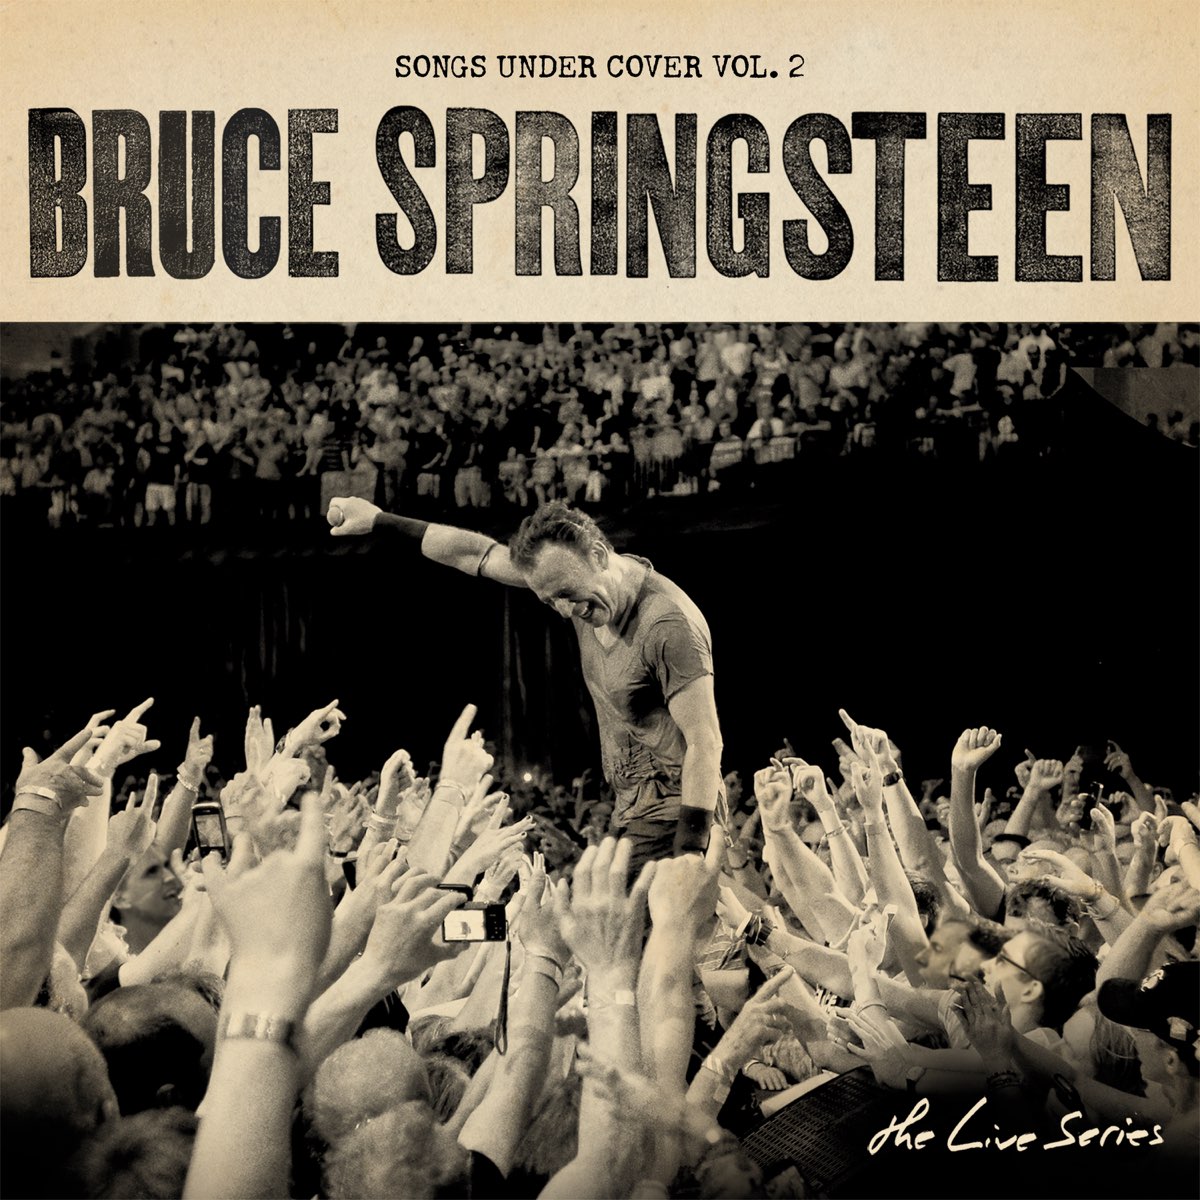 The Live Series: Songs Under Cover Vol. 2 - Album by Bruce Springsteen -  Apple Music